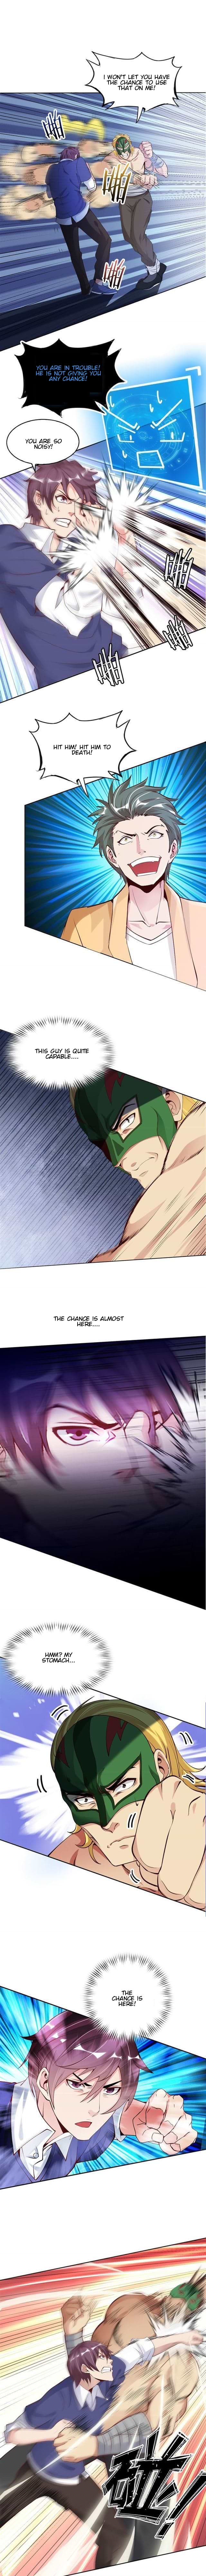 I Am An Invincible Genius Ch. 5 Chapter 5